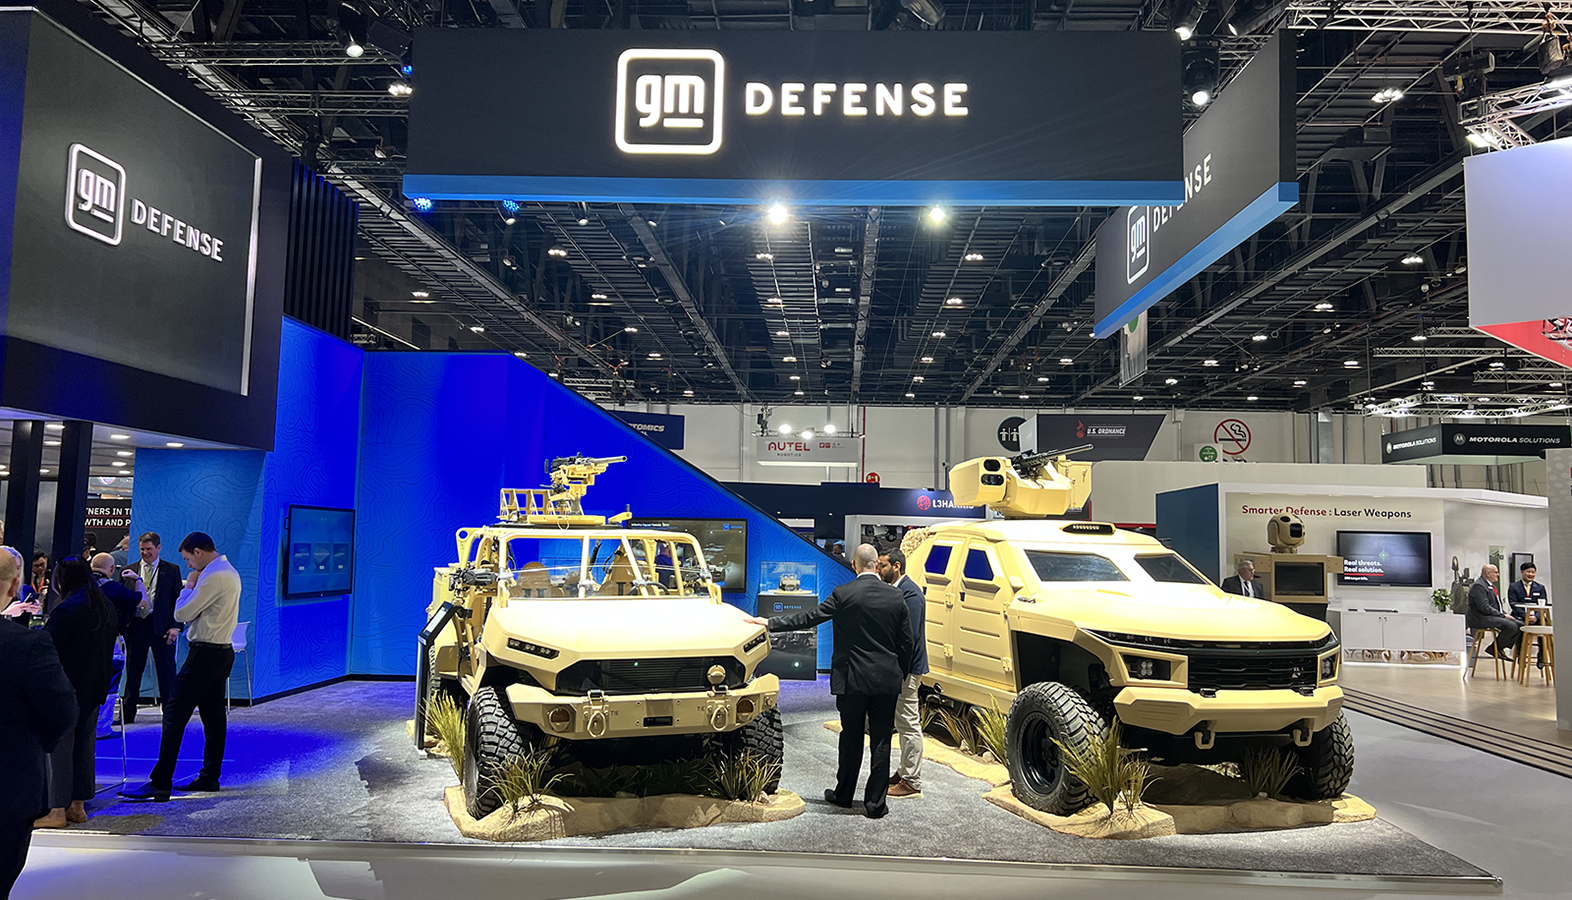 At IDEX 2023, GM Defense inks partnership 'expanding... reach' in ...